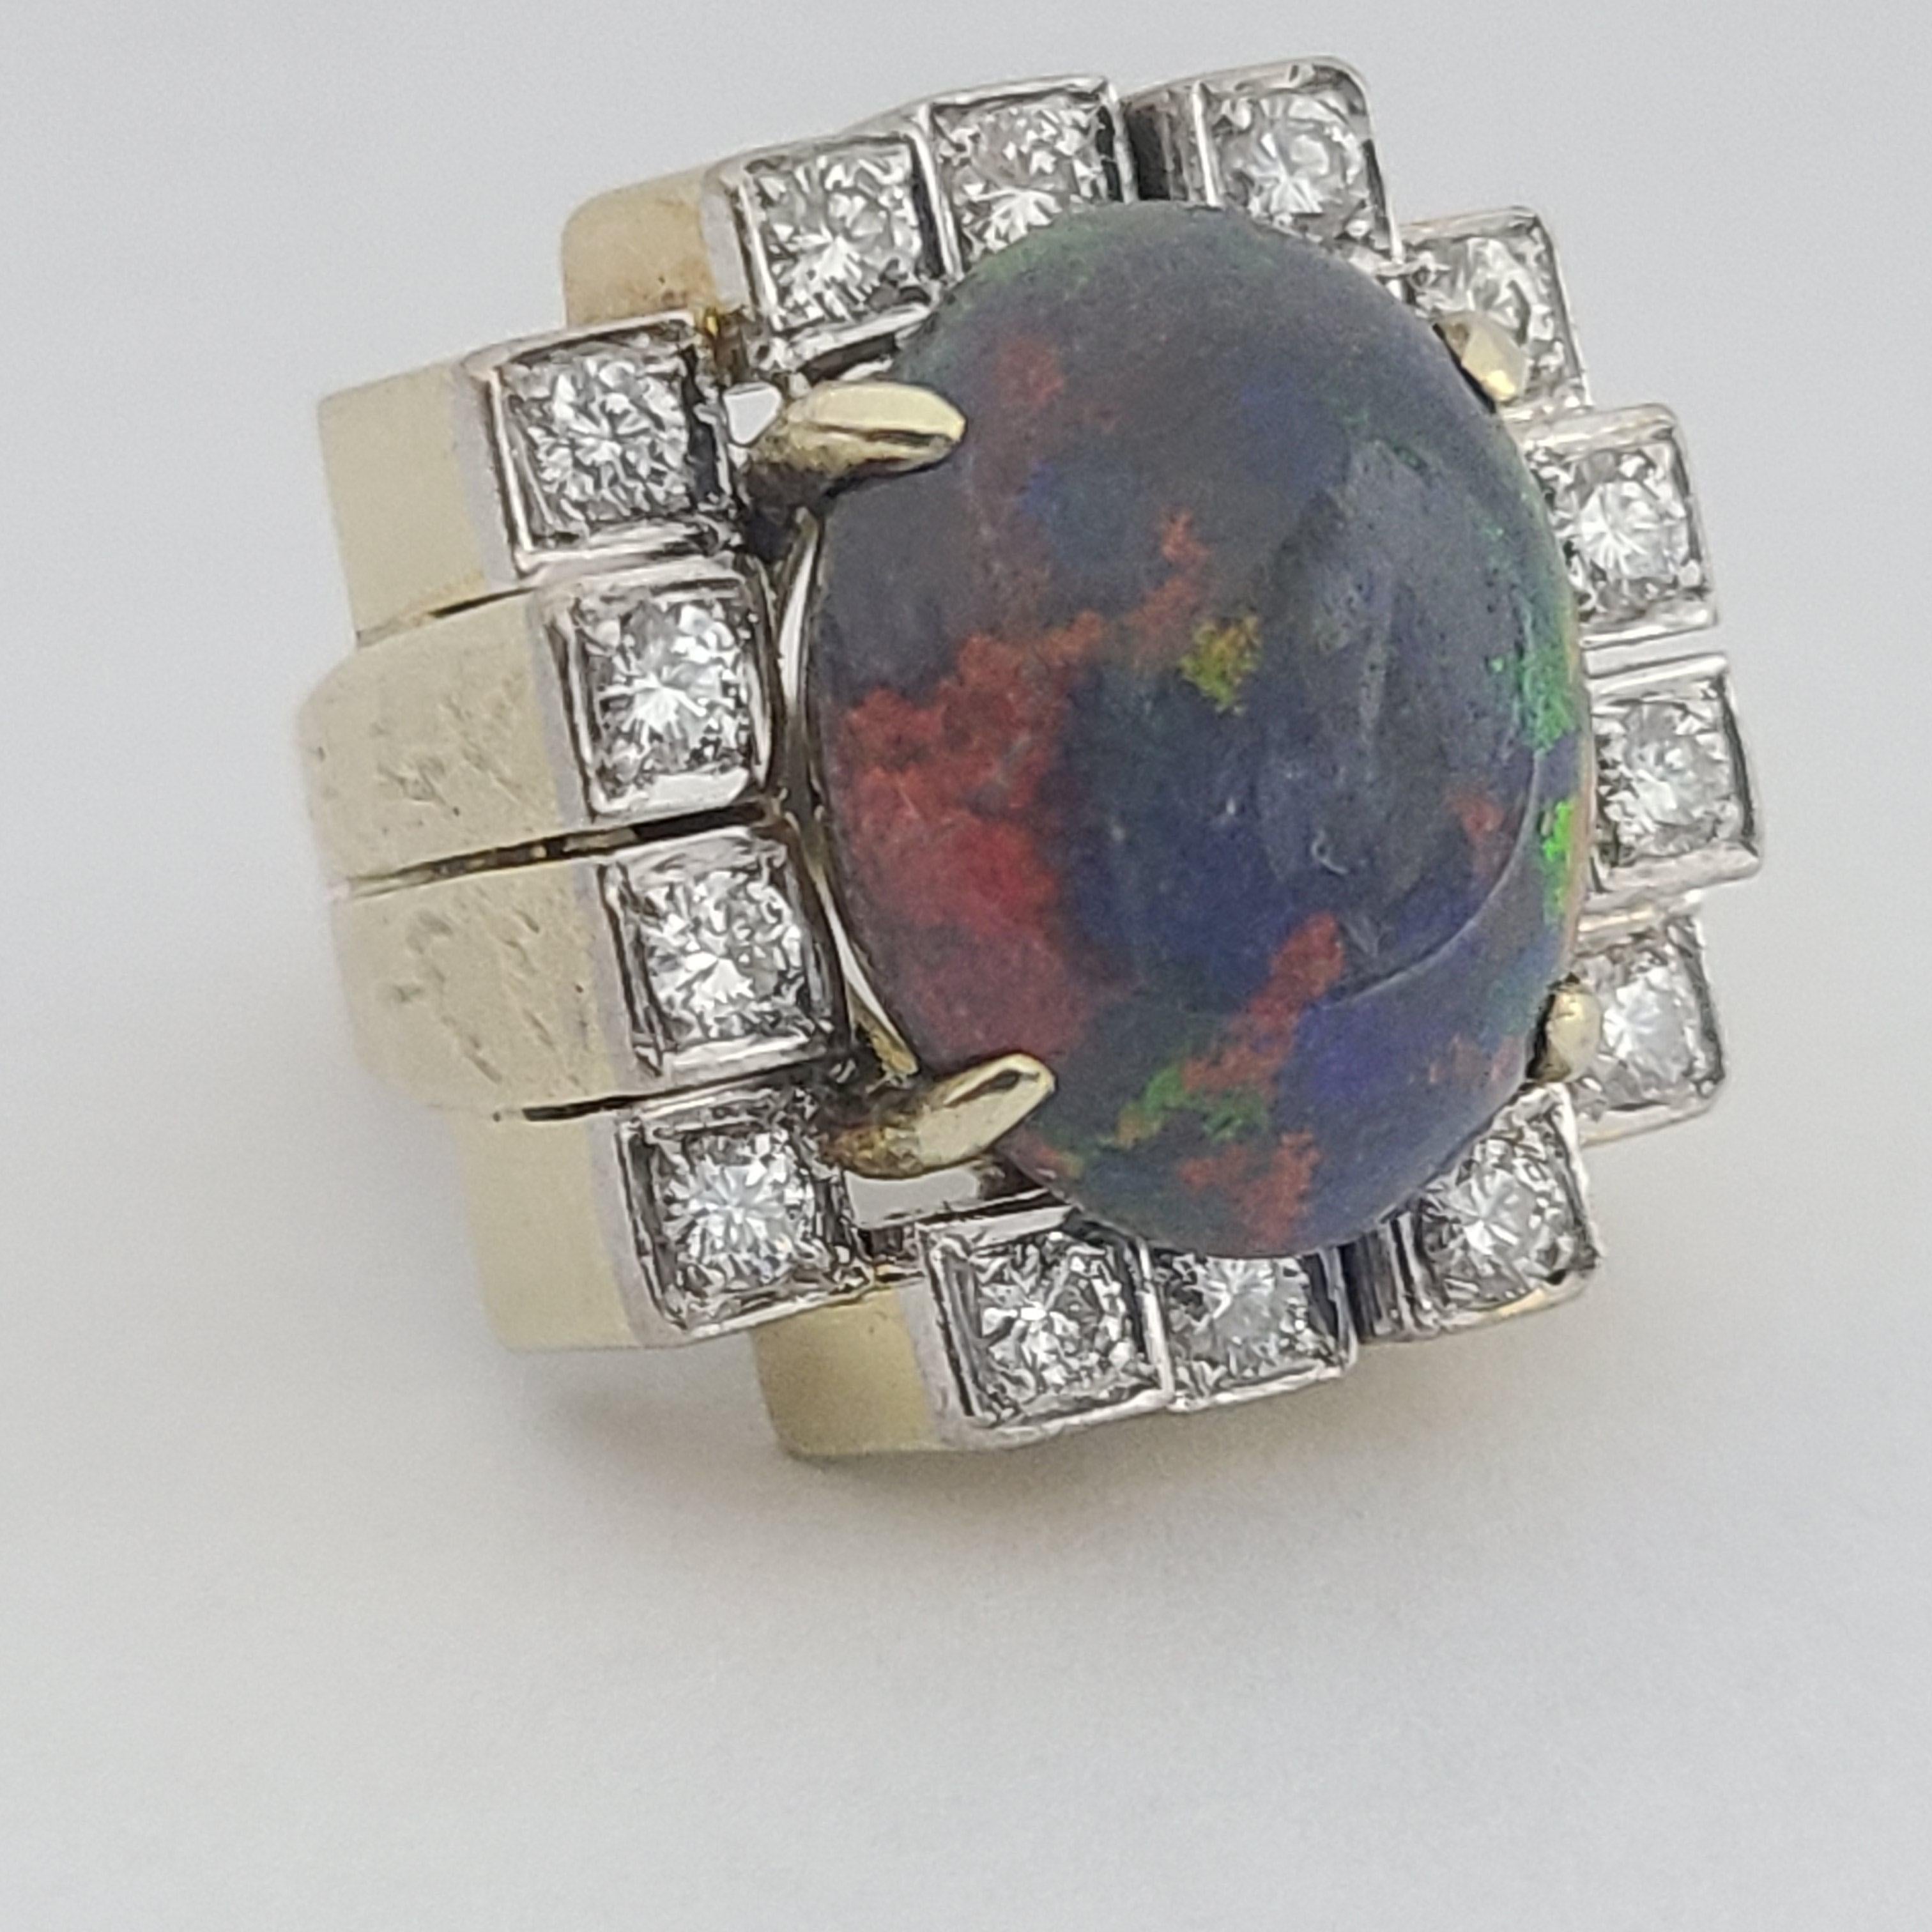 Amazing platinum topped modernist cubist chunky and hefty 17.3g 14k gold ring.  Set w/ a 16 x 12mm natural black opal cabachon with amazing play of color, bright electric oranges, purples, blues, and vivid reds.  14 approx 2.5-2.75mm full cut round